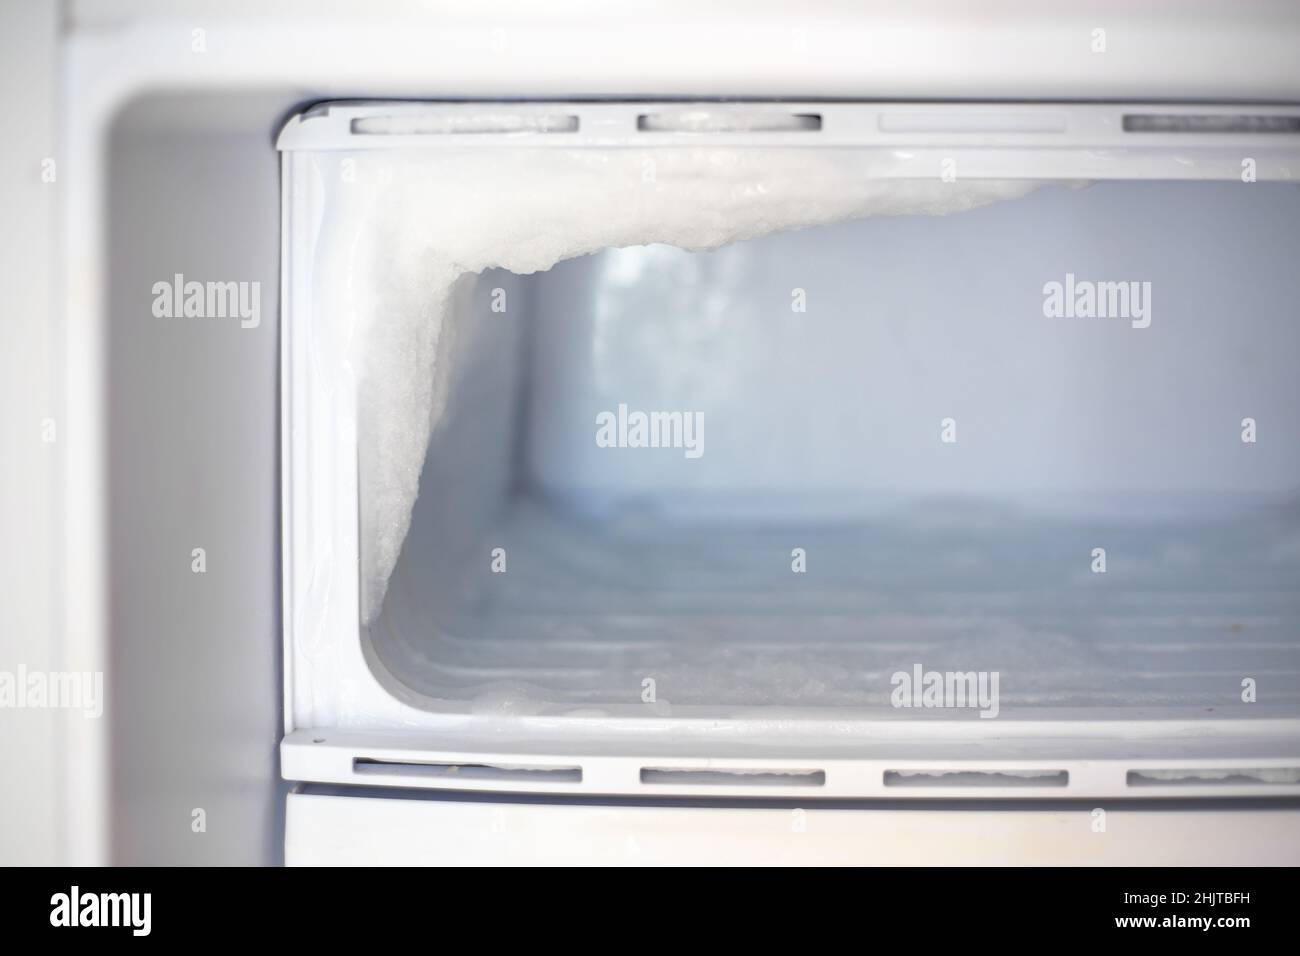 Fridge freezer with frozen ice. Maintenance and defrosting of the refrigerator. Stock Photo